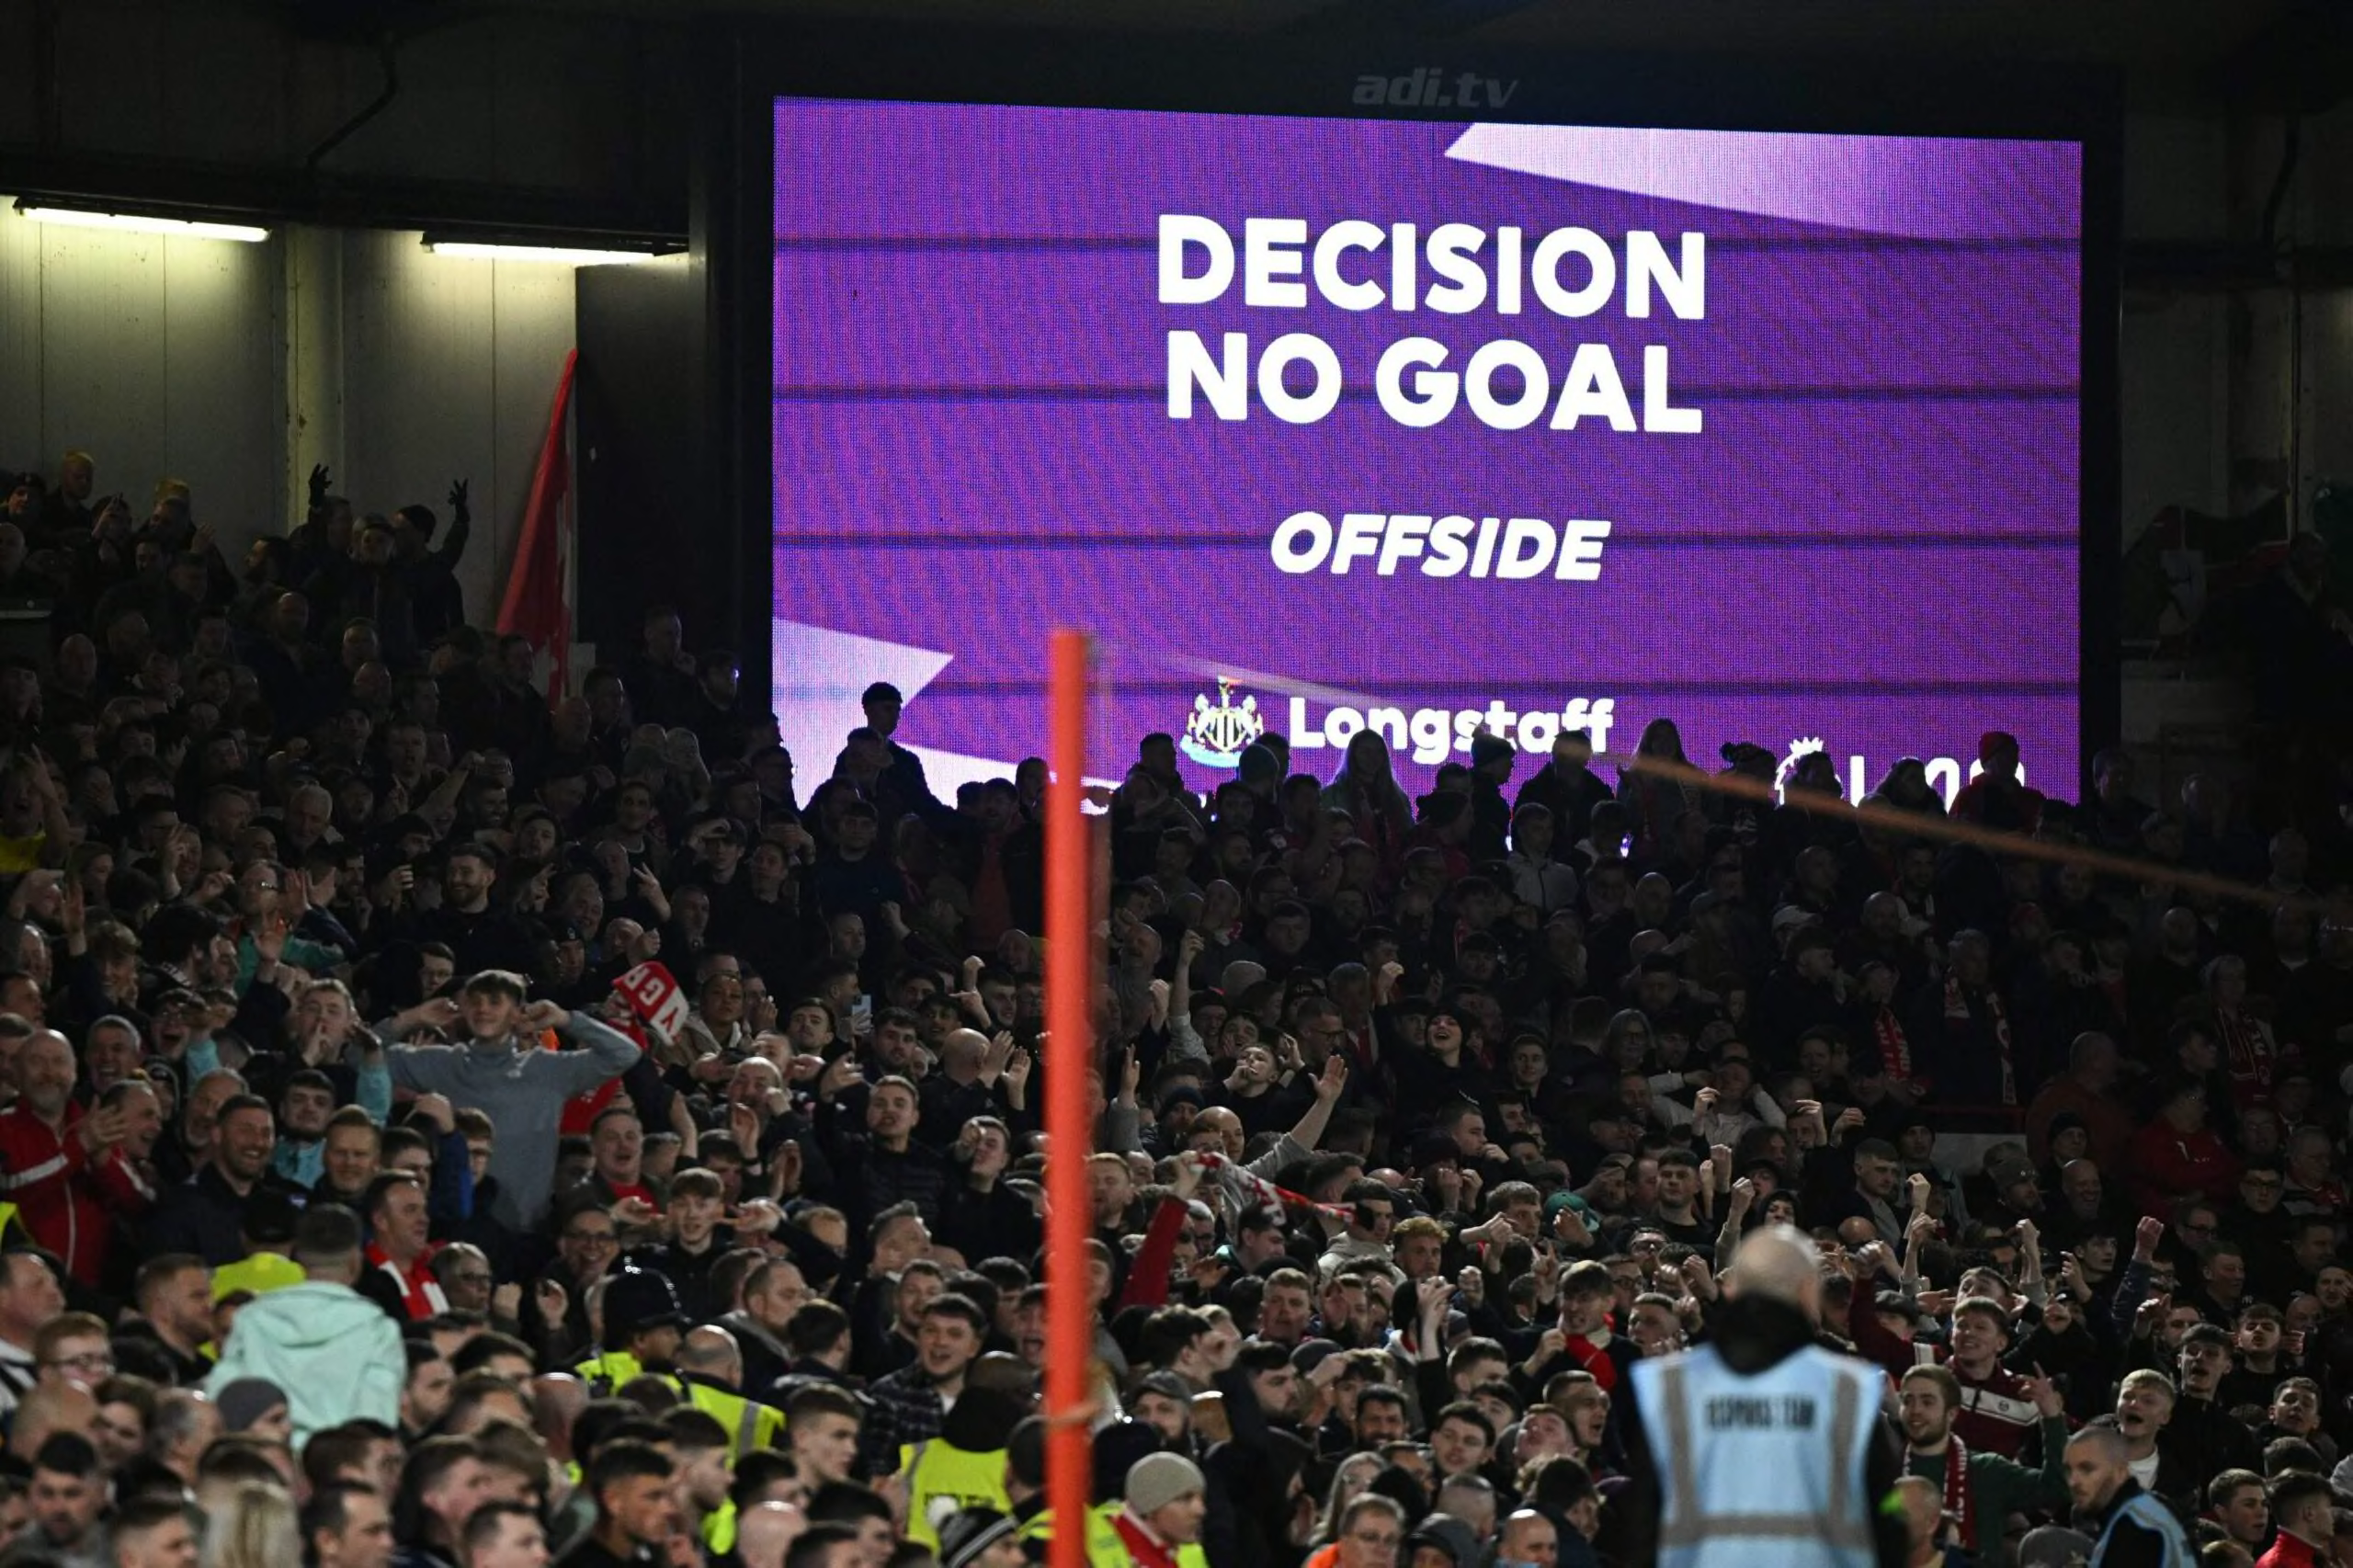 The big screen shows the offside decision of a Newcastle goal after a VAR (Video Assistant Referee) review during the English Premier League football match between Nottingham Forest and Newcastle United at The City Ground in Nottingham, central England, on March 17, 2023.